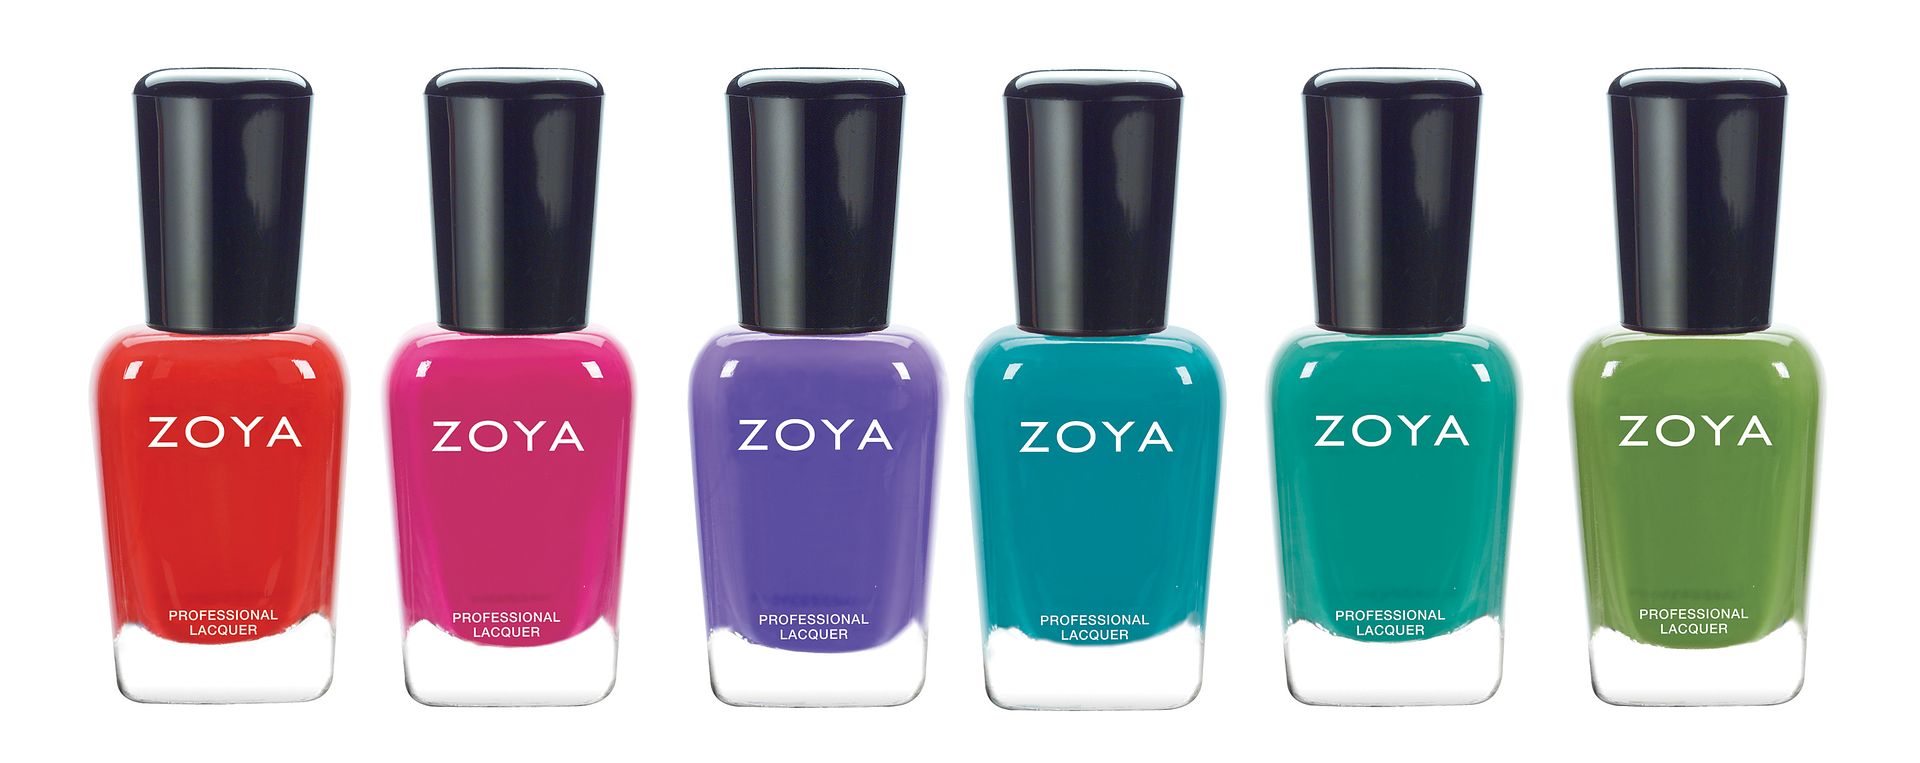 Zoya Entice and Ignite Collections Press Release - Naked 